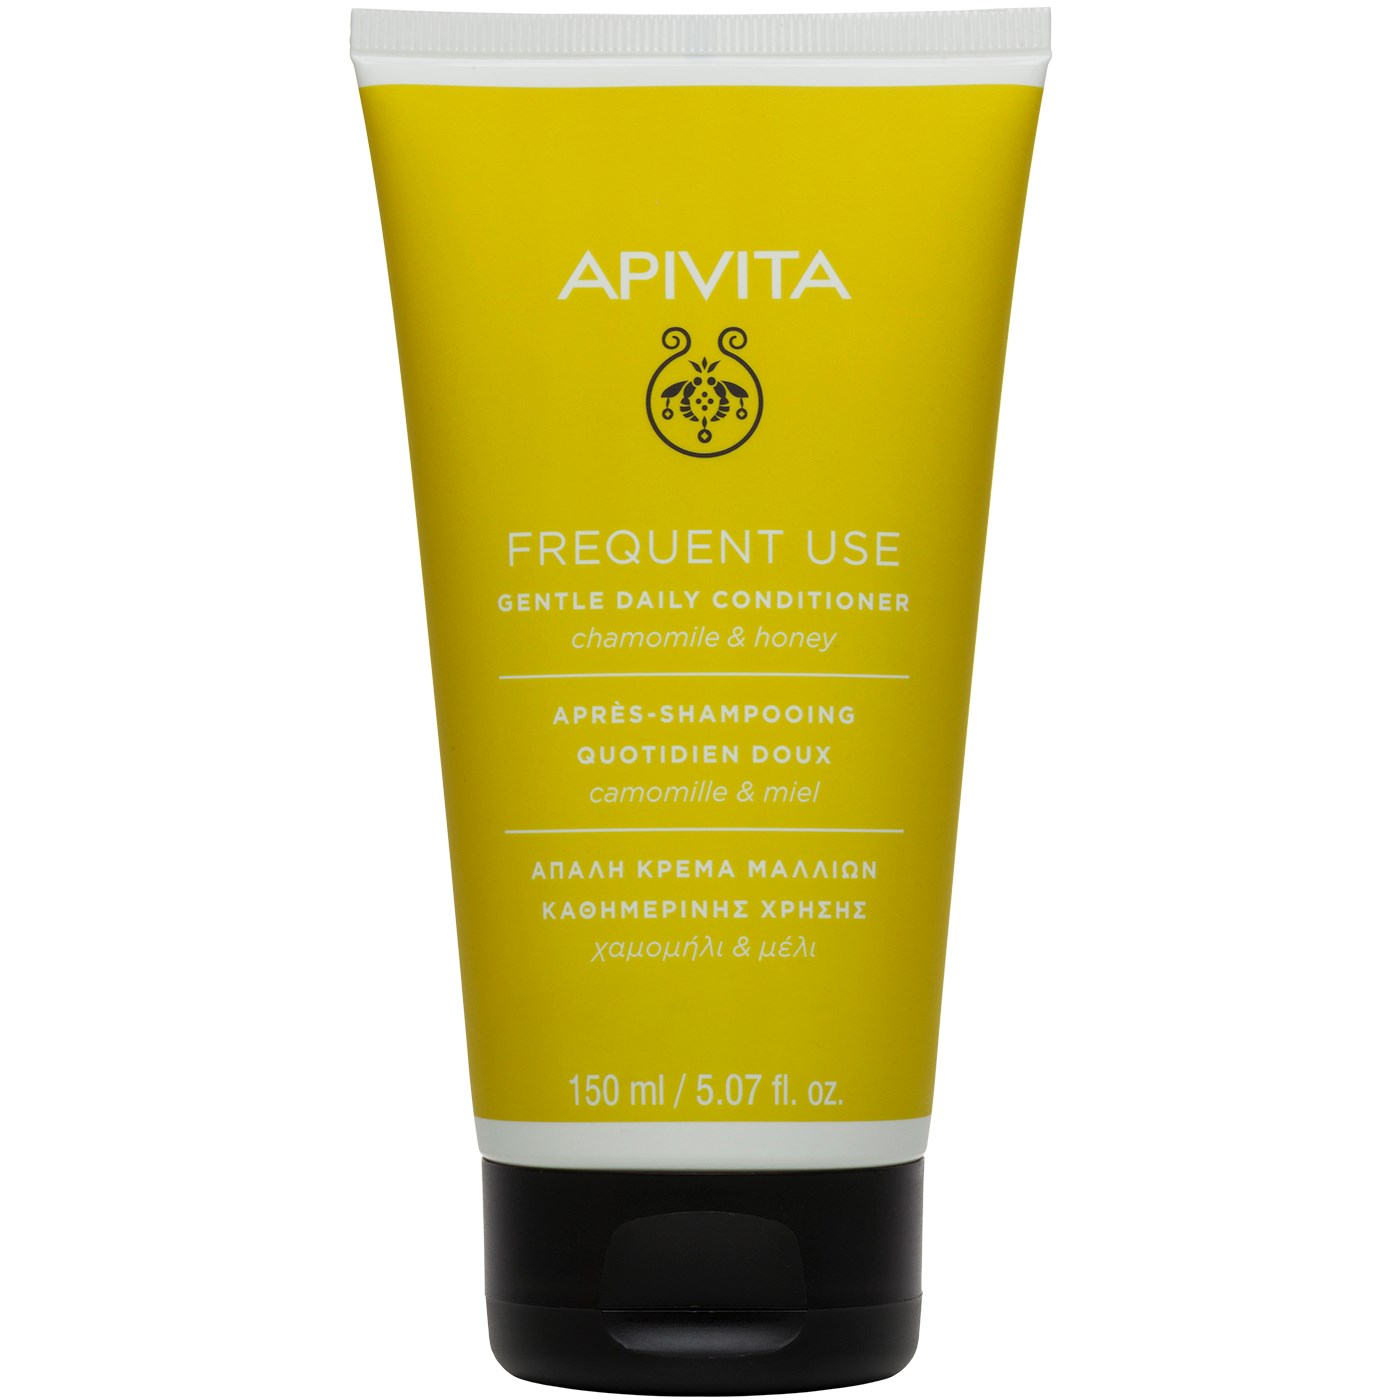 APIVITA Frequent Use Gentle Daily Conditioner  150 ml